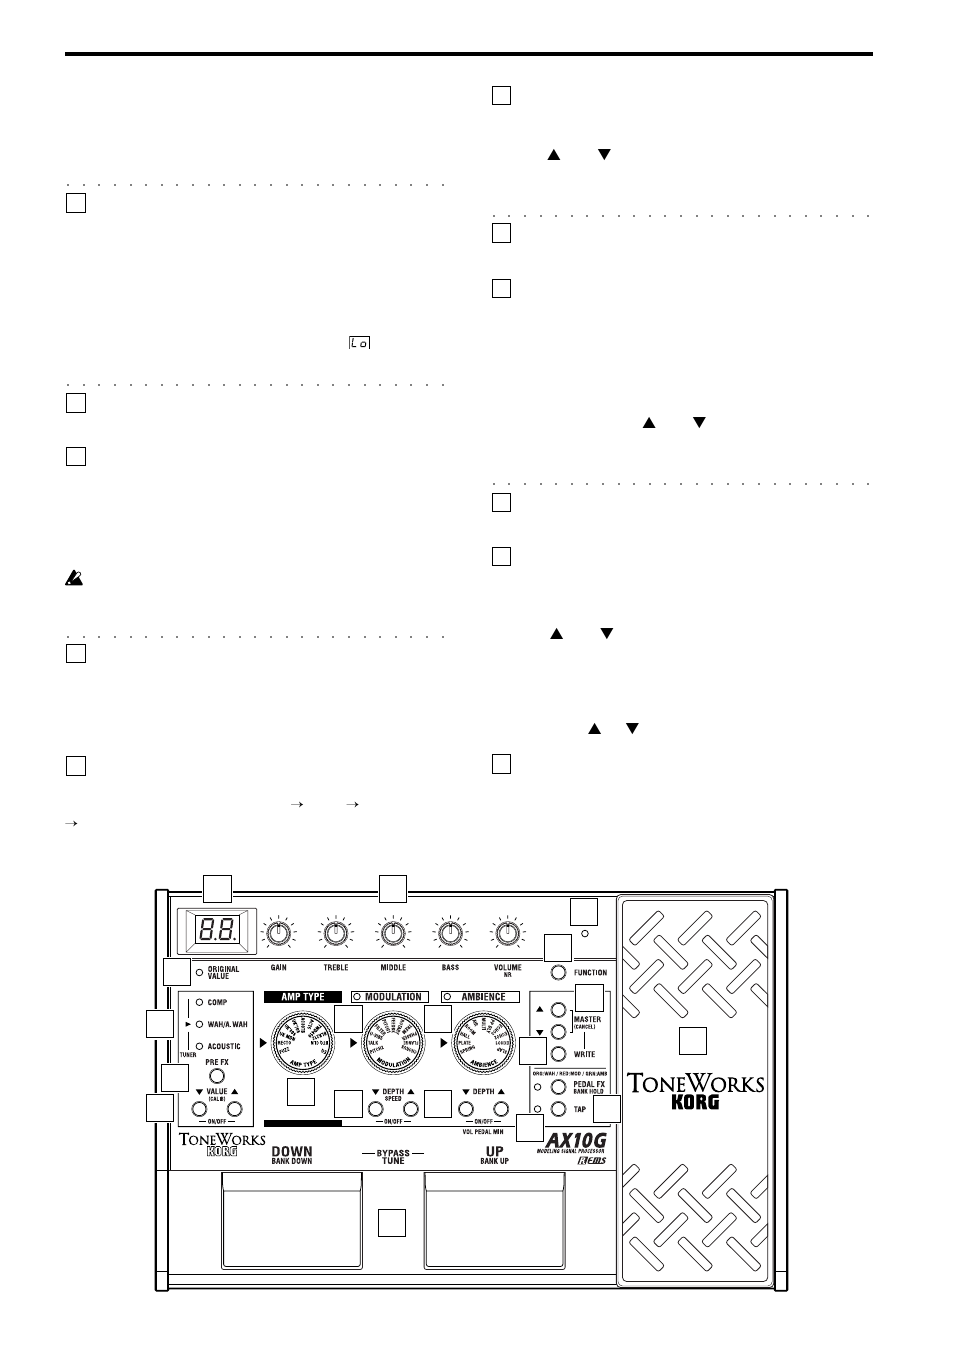 Parts and what they do, Front panel | KORG TONEWORKS AX10G User Manual |  Page 6 / 40 | Original mode